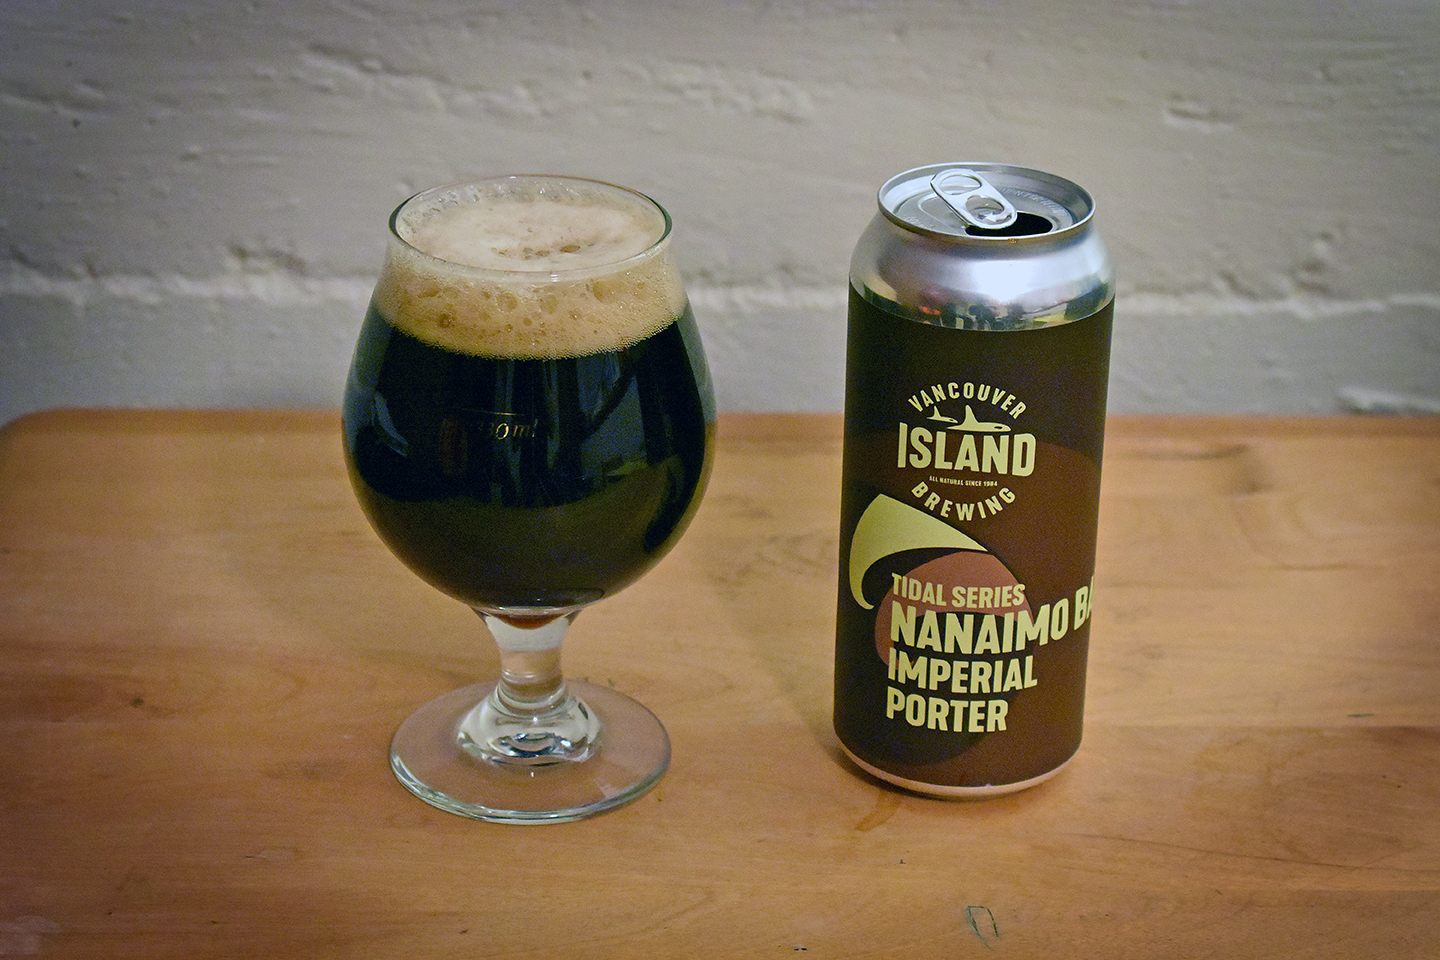 Nanaimo Bar Imperial Porter by Vancouver Island Brewing.